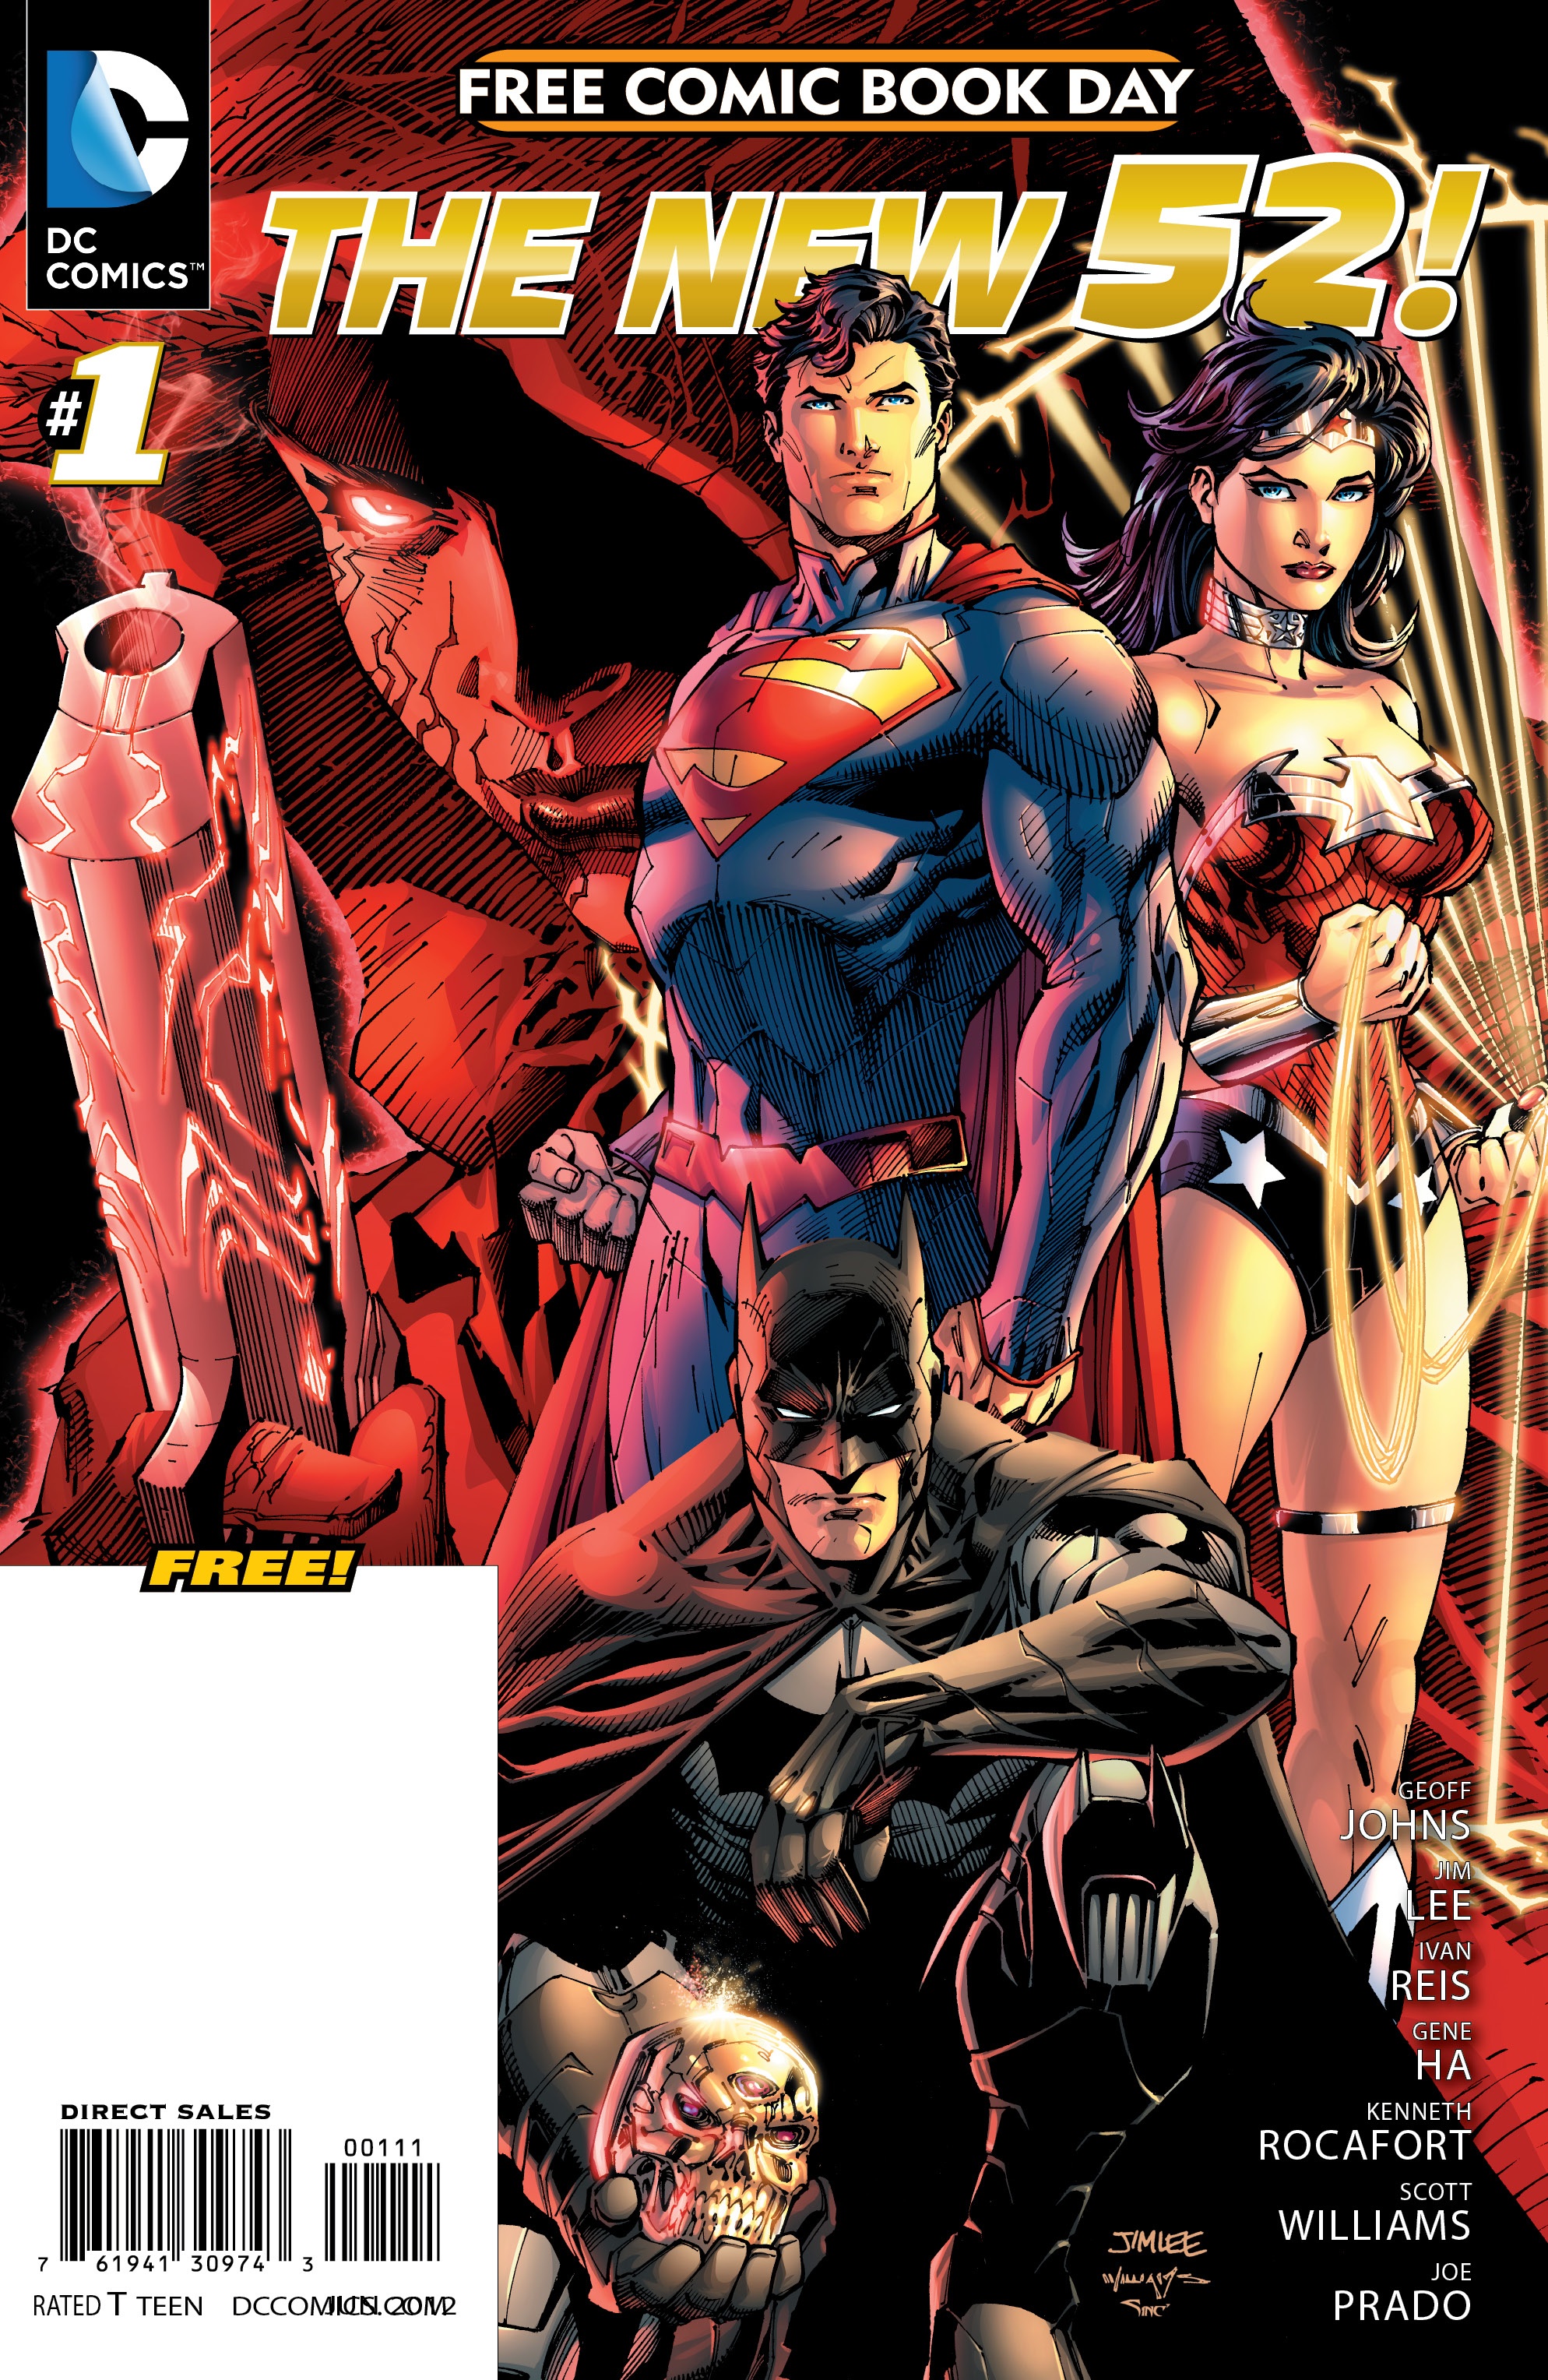 http://www.supermanhomepage.com/images/comic-covers/Post-Flashpoint-Covers/JusticeLeague-2012/DC-New-52-1-FCBD.jpg